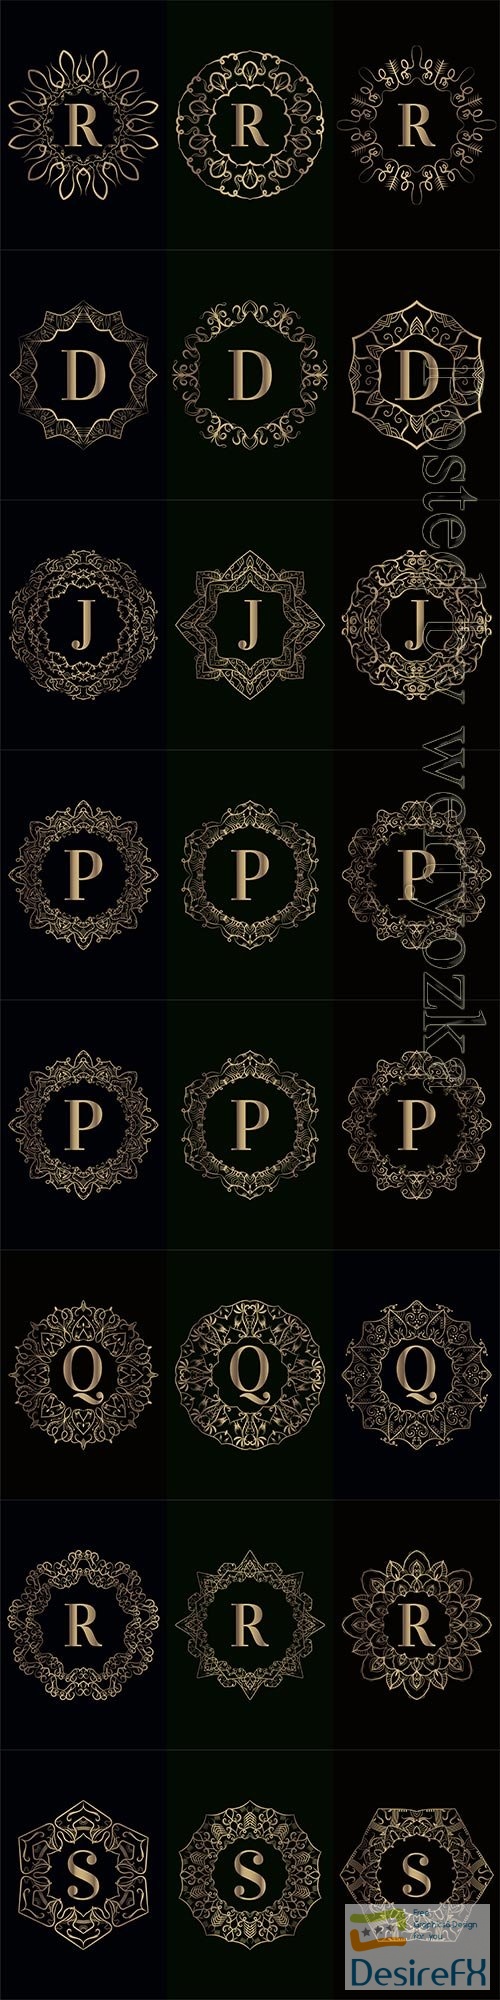 Collection of vector logo initial with luxury mandala ornament frame